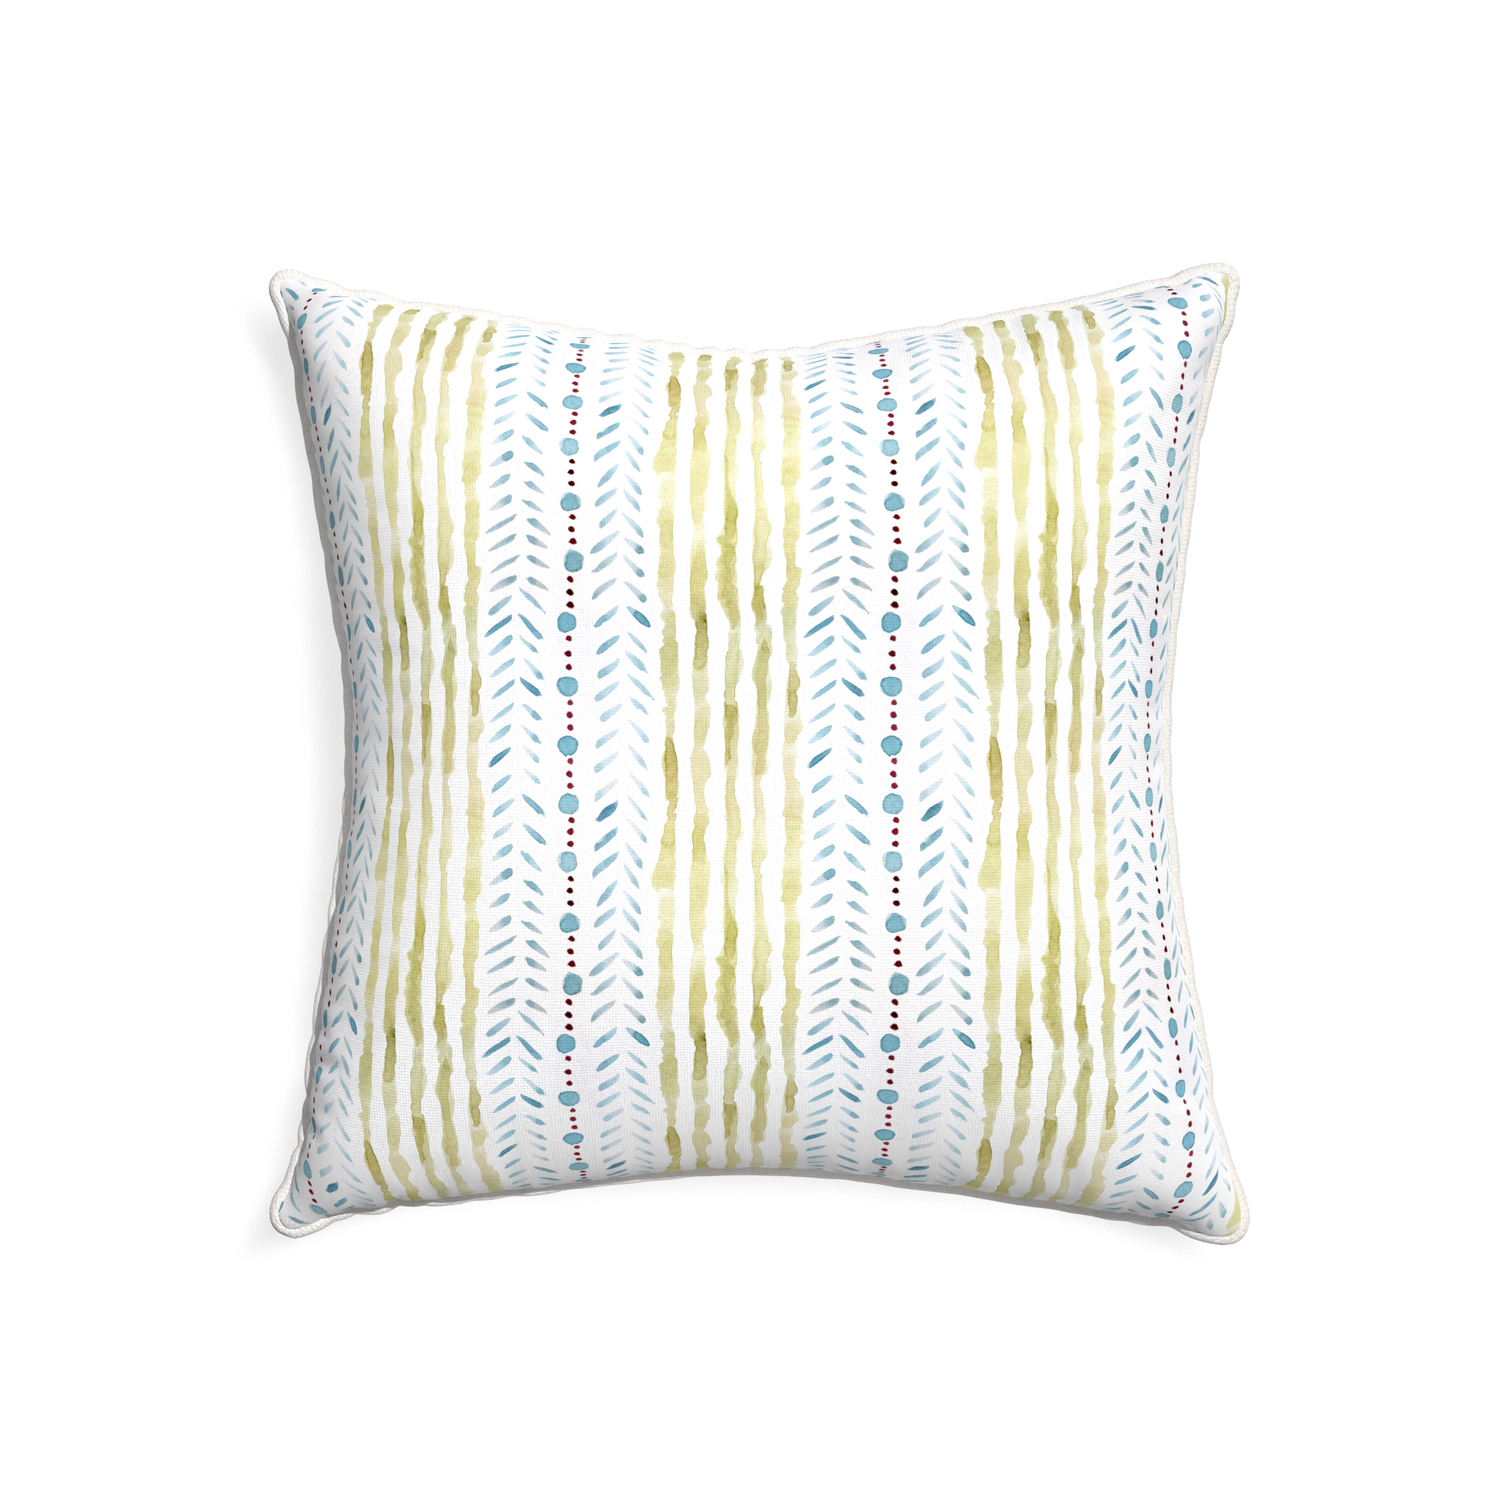 22-square julia custom blue & green stripedpillow with snow piping on white background